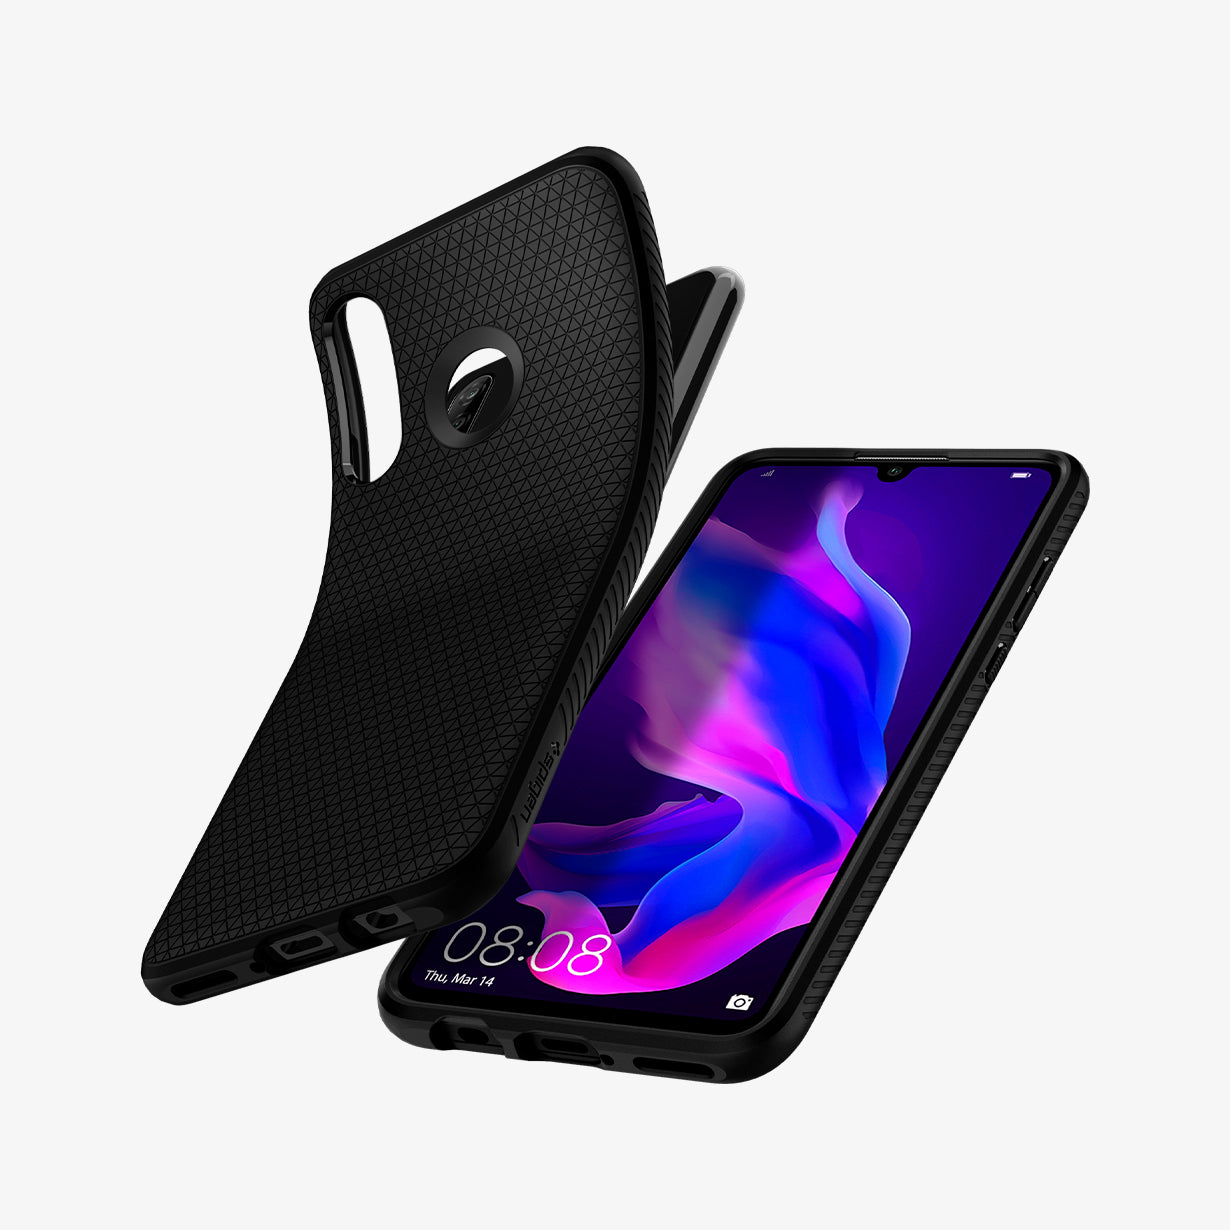 L39CS25738 - Huawei P30 Lite / Nova 4e Case Liquid Air in black showing the back, front and sides